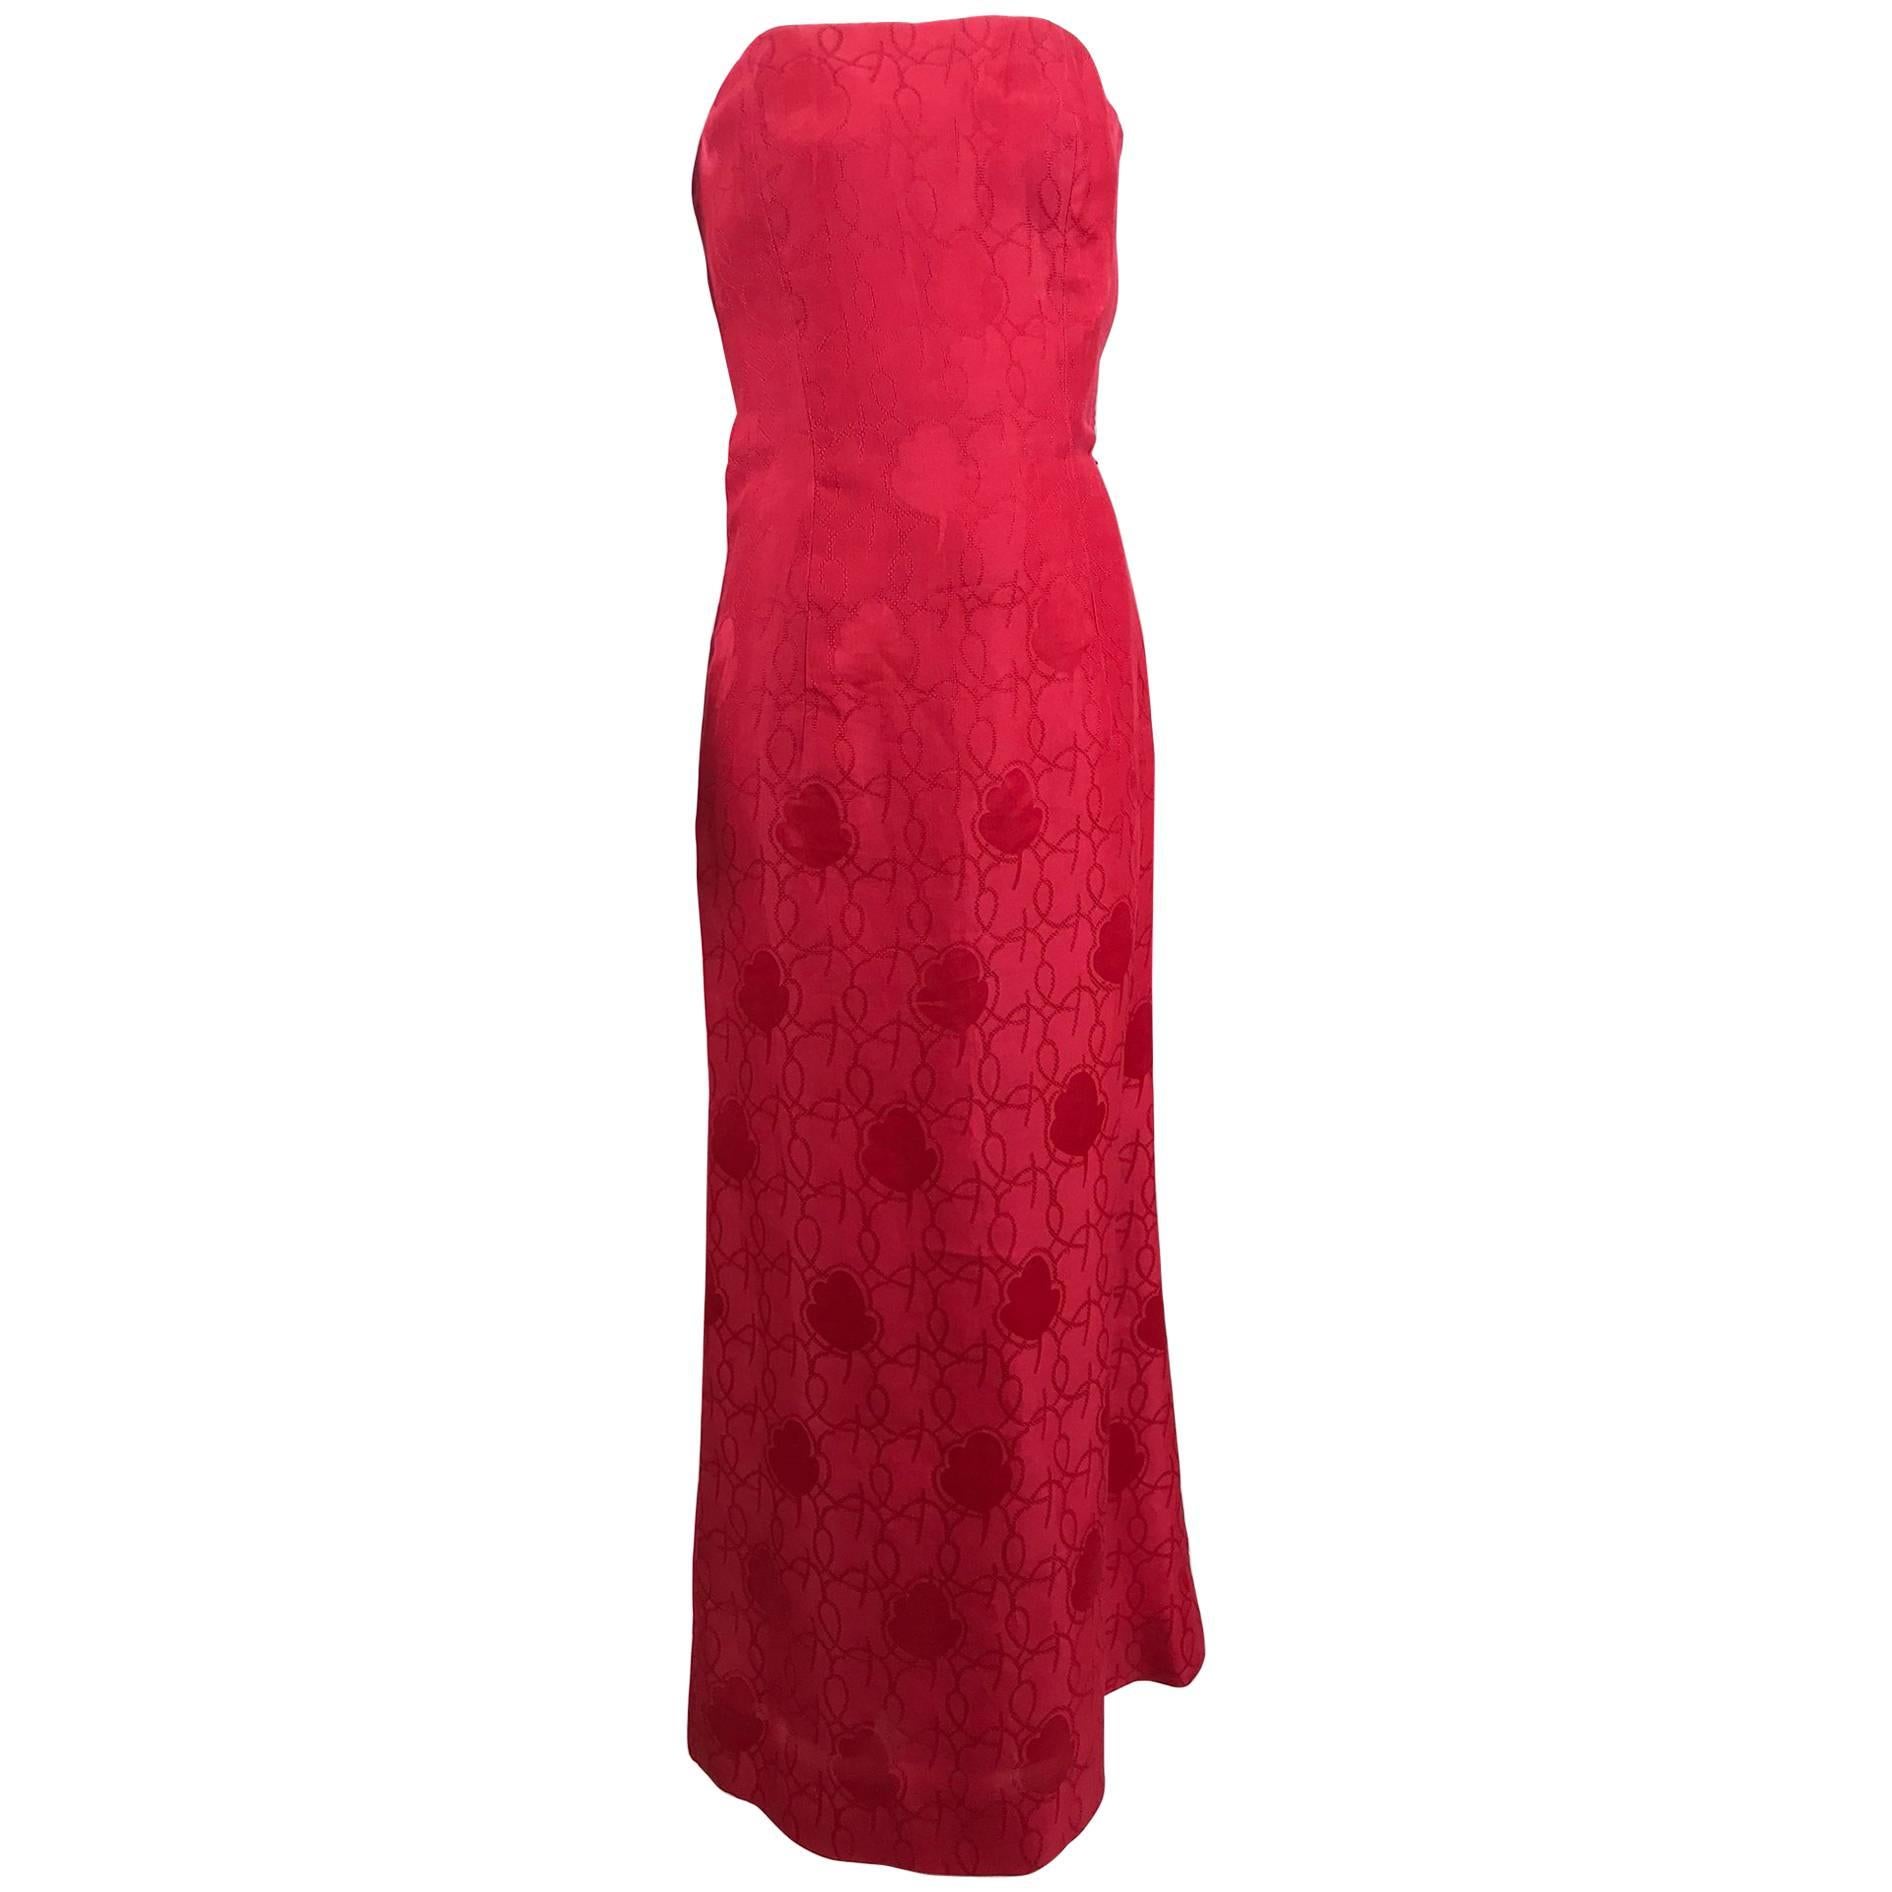 Givenchy Raspberry Strapless Silk Jacquard Column Gown, 1960s